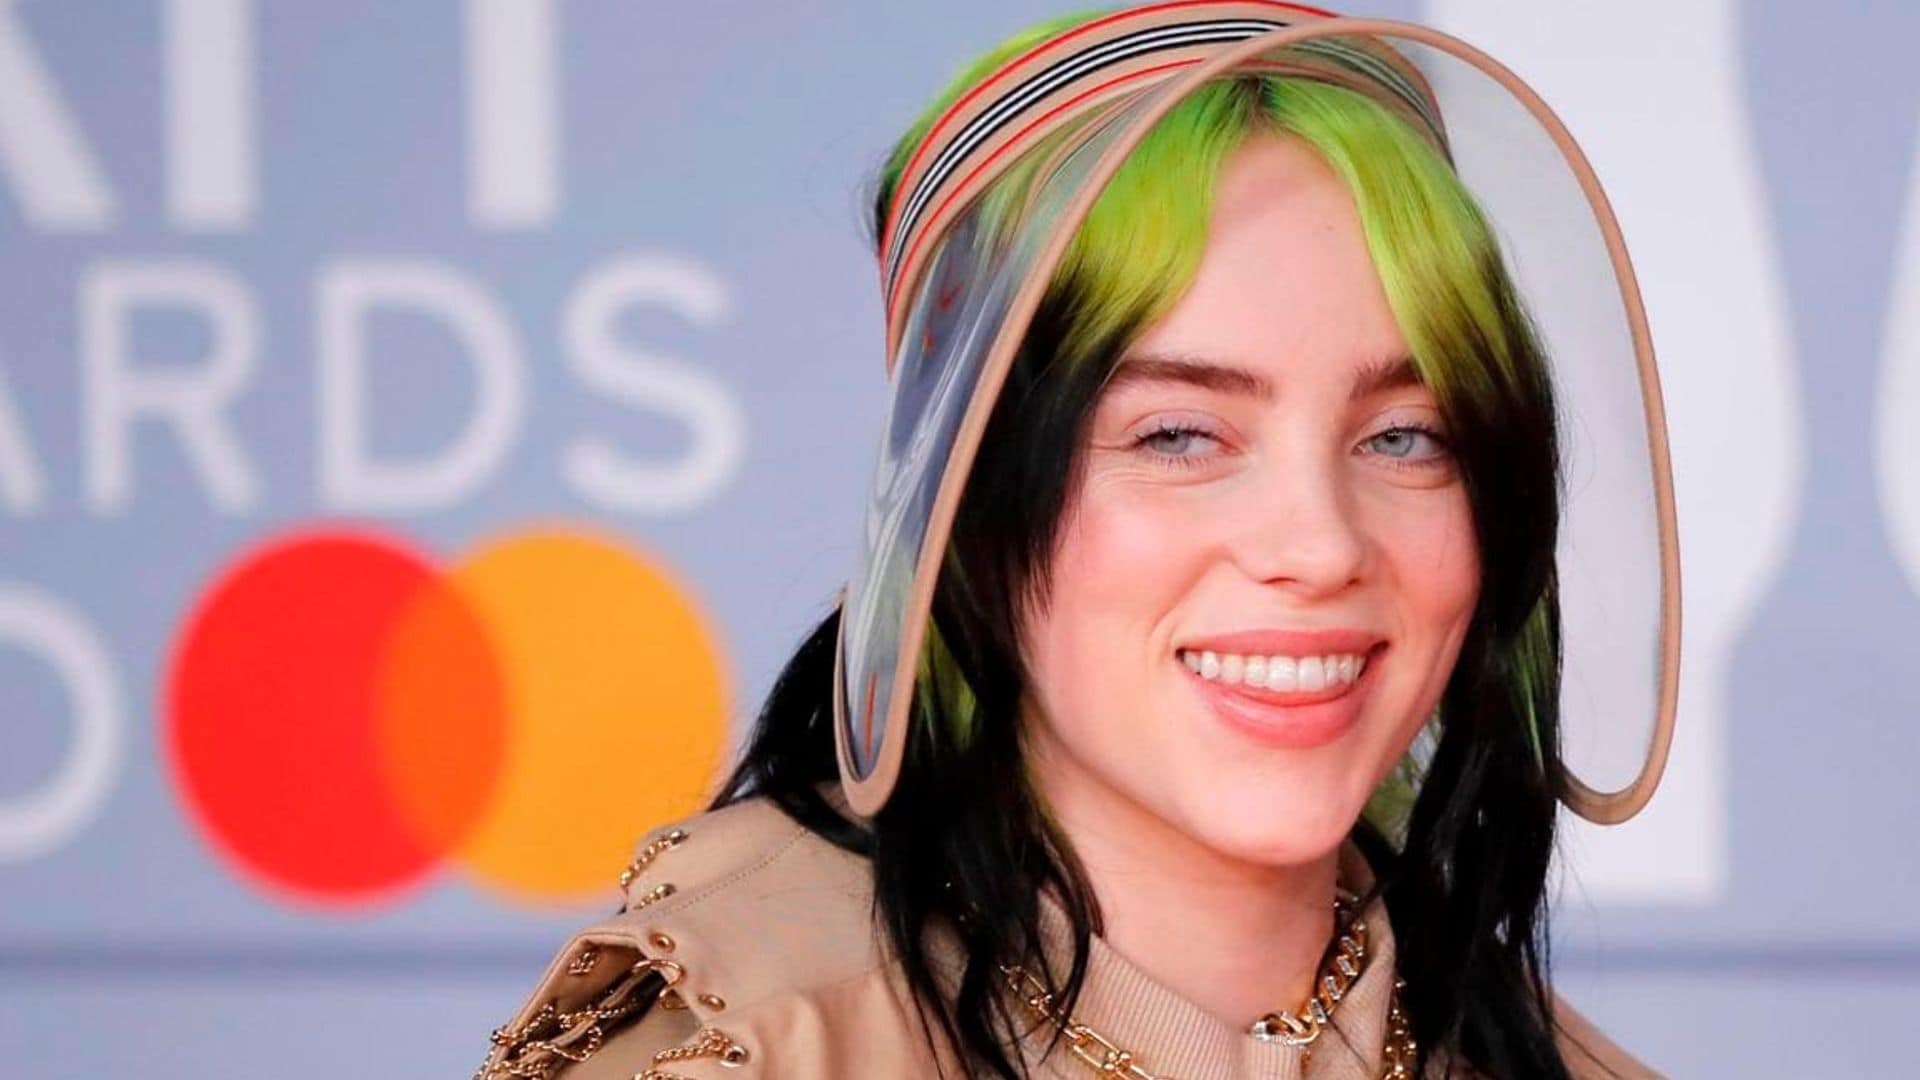 Billie Eilish clapped back at body shamers over a recent paparazzi picture